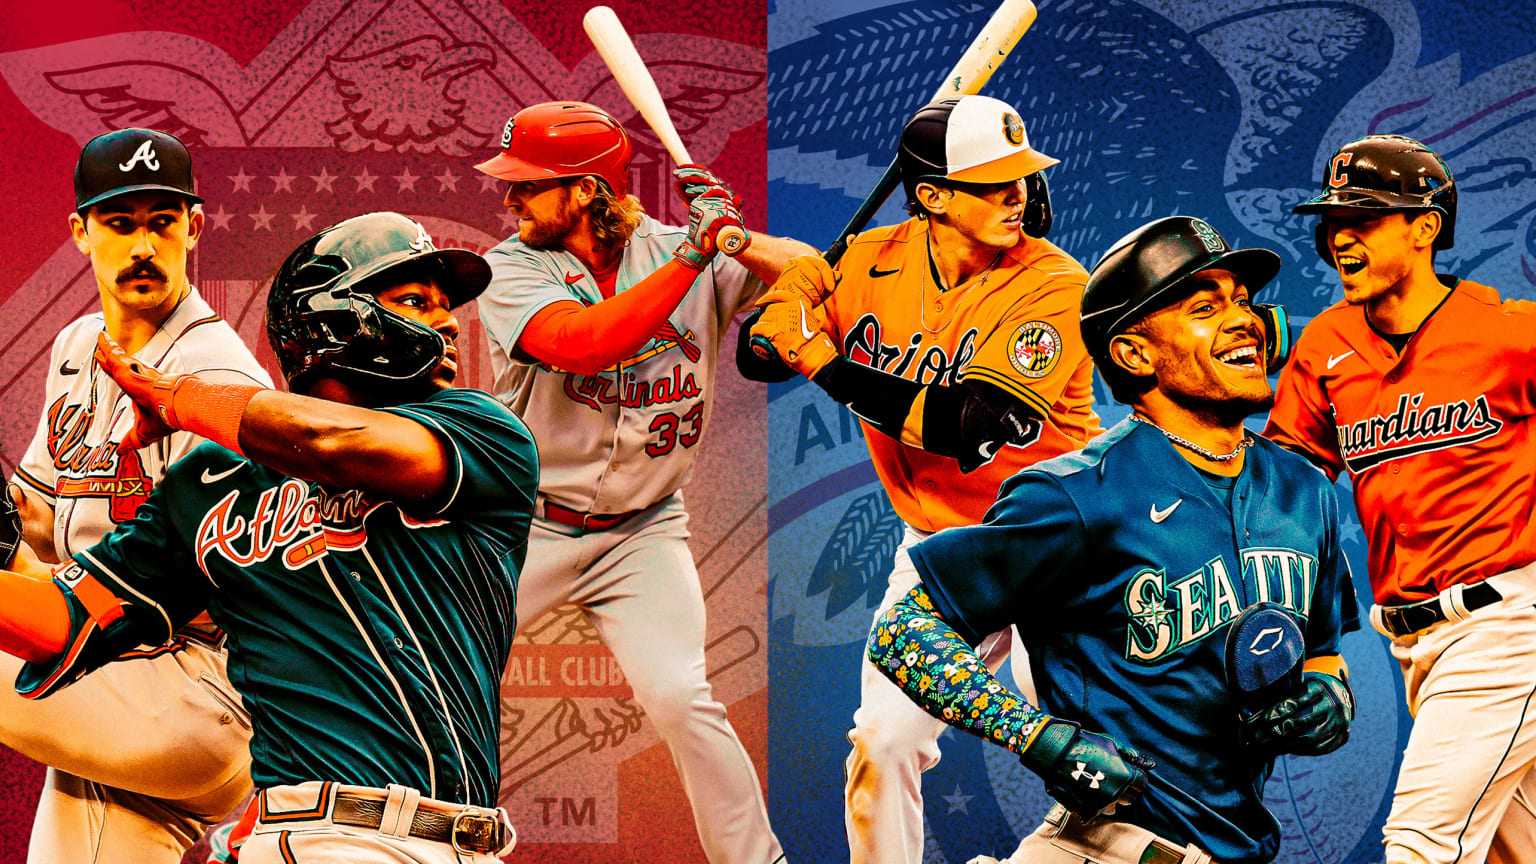 Three NL prospects on the left, over a red-tinted National League logo and three AL prospects on the right over a blue-shaded American League logo